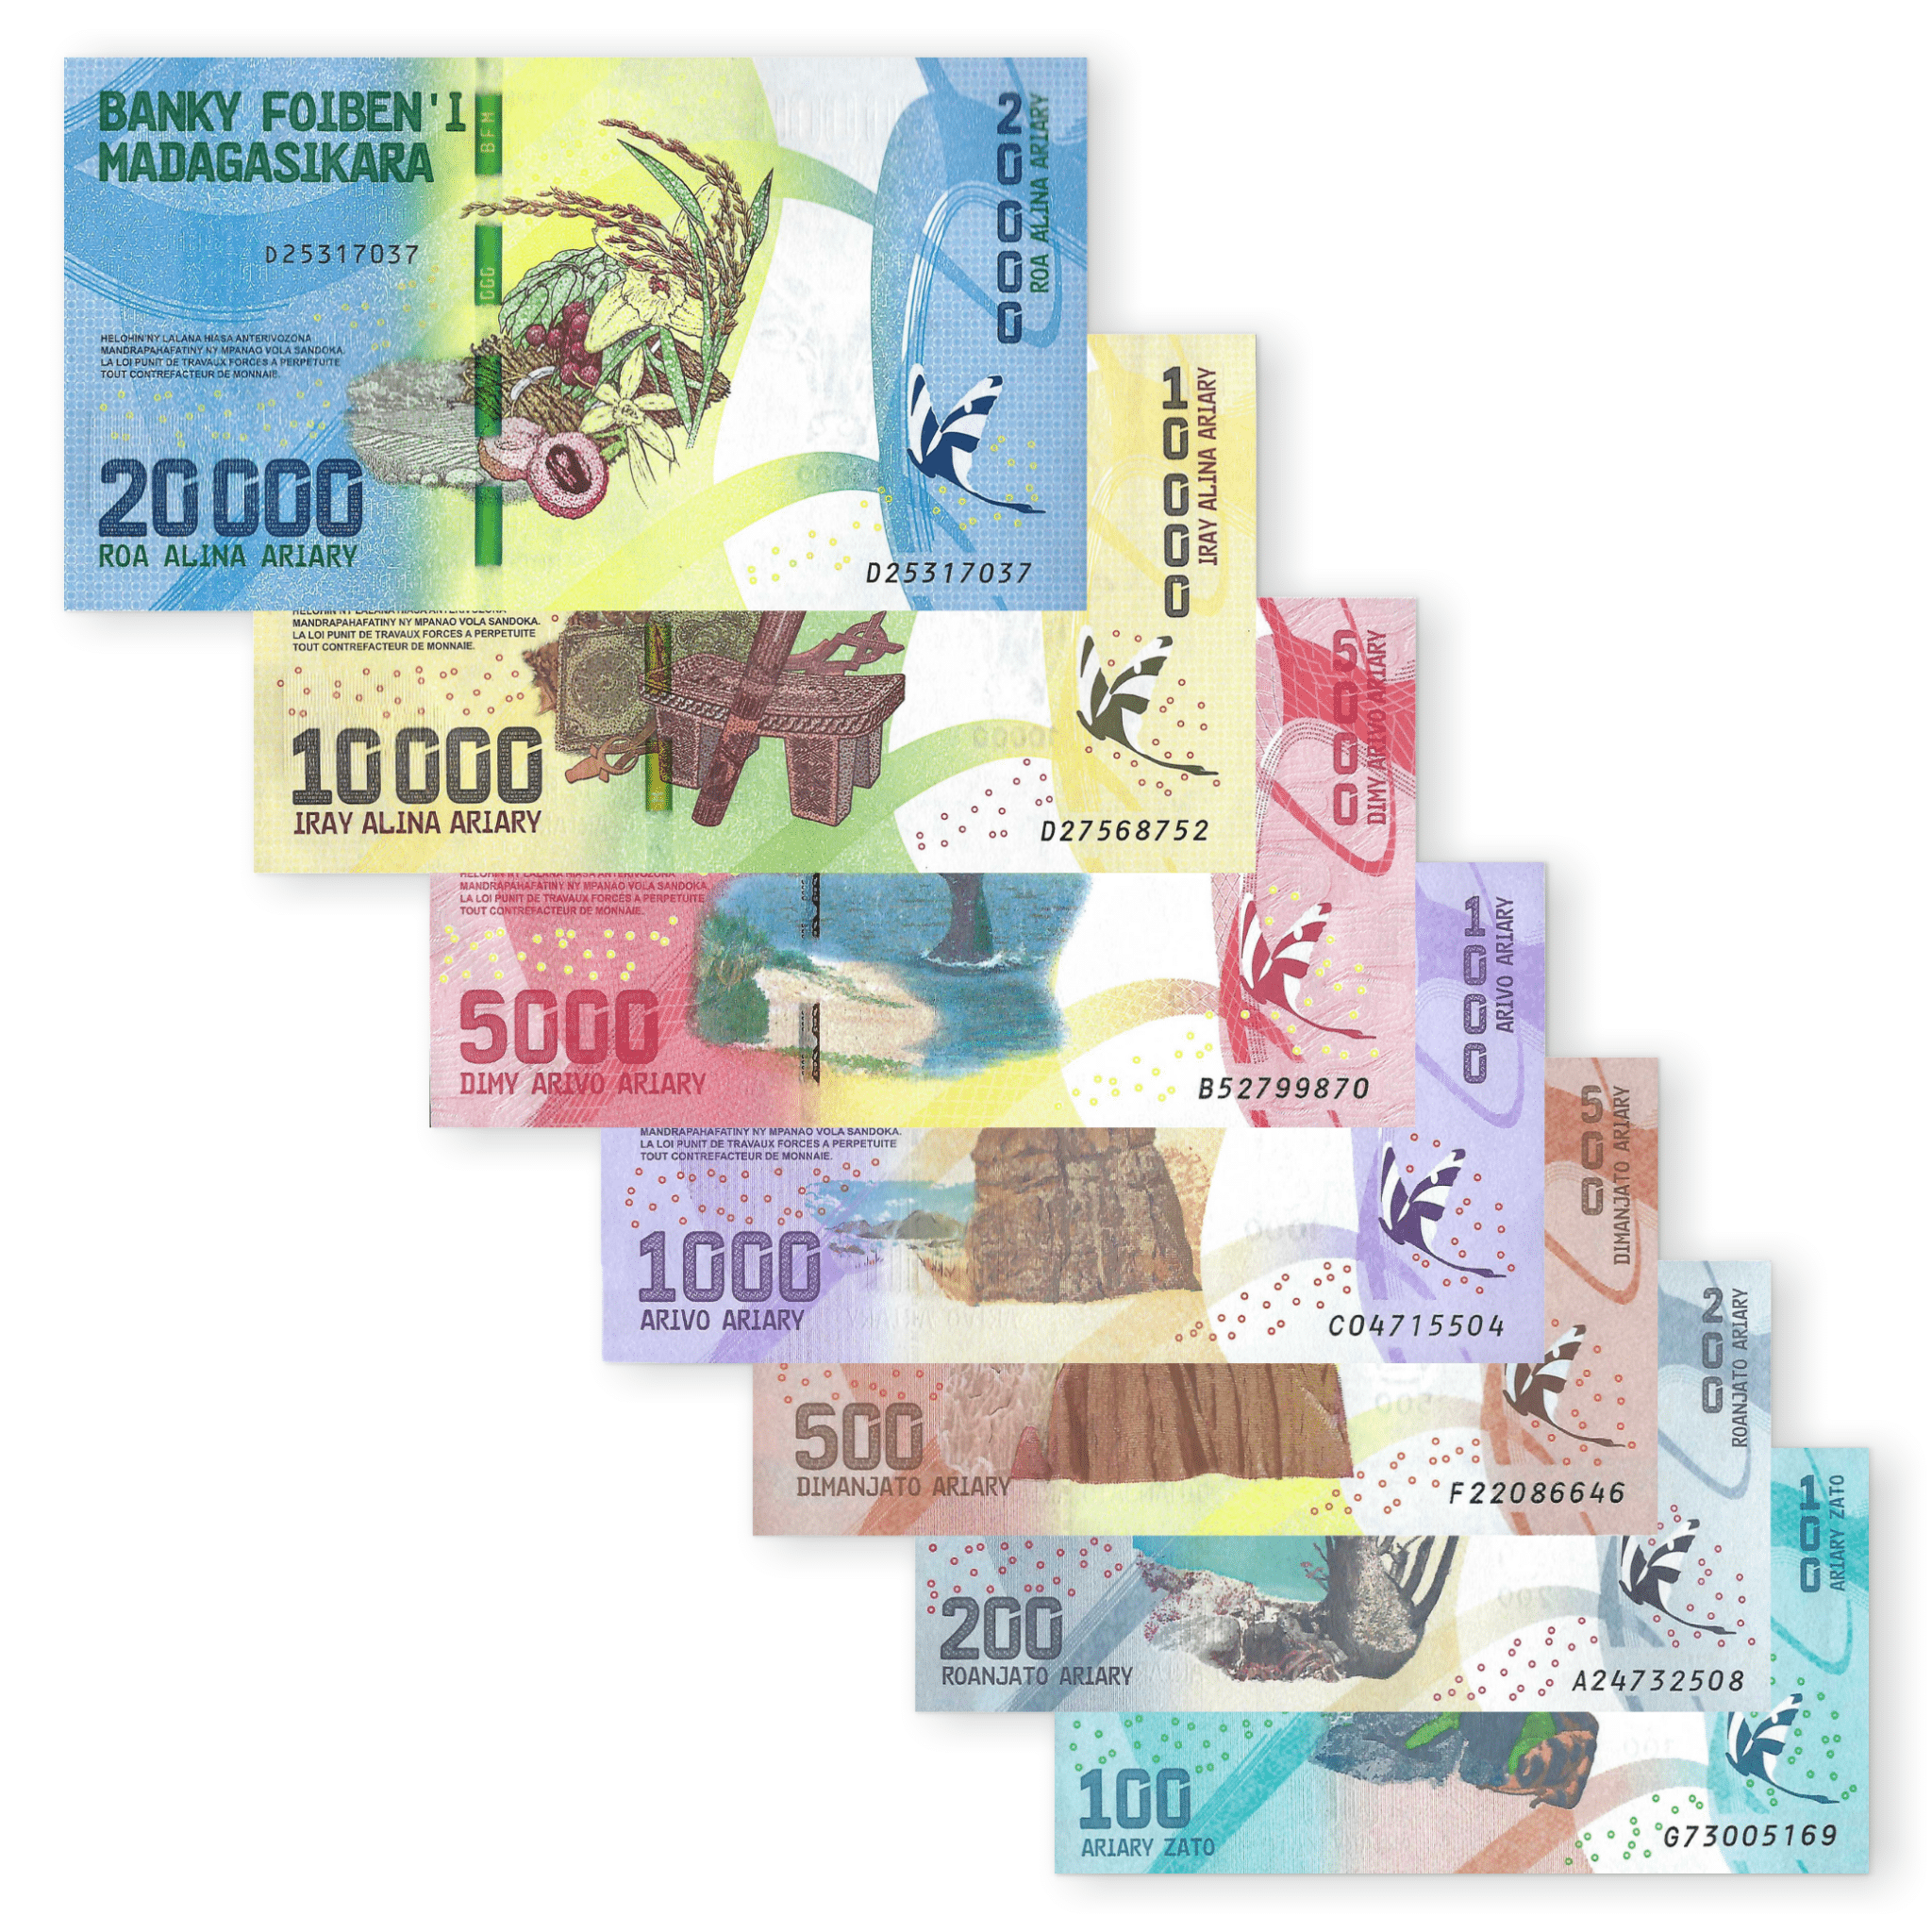 Madagascar Ariary Currency and Banknotes For Sale | Collectibles & Currency